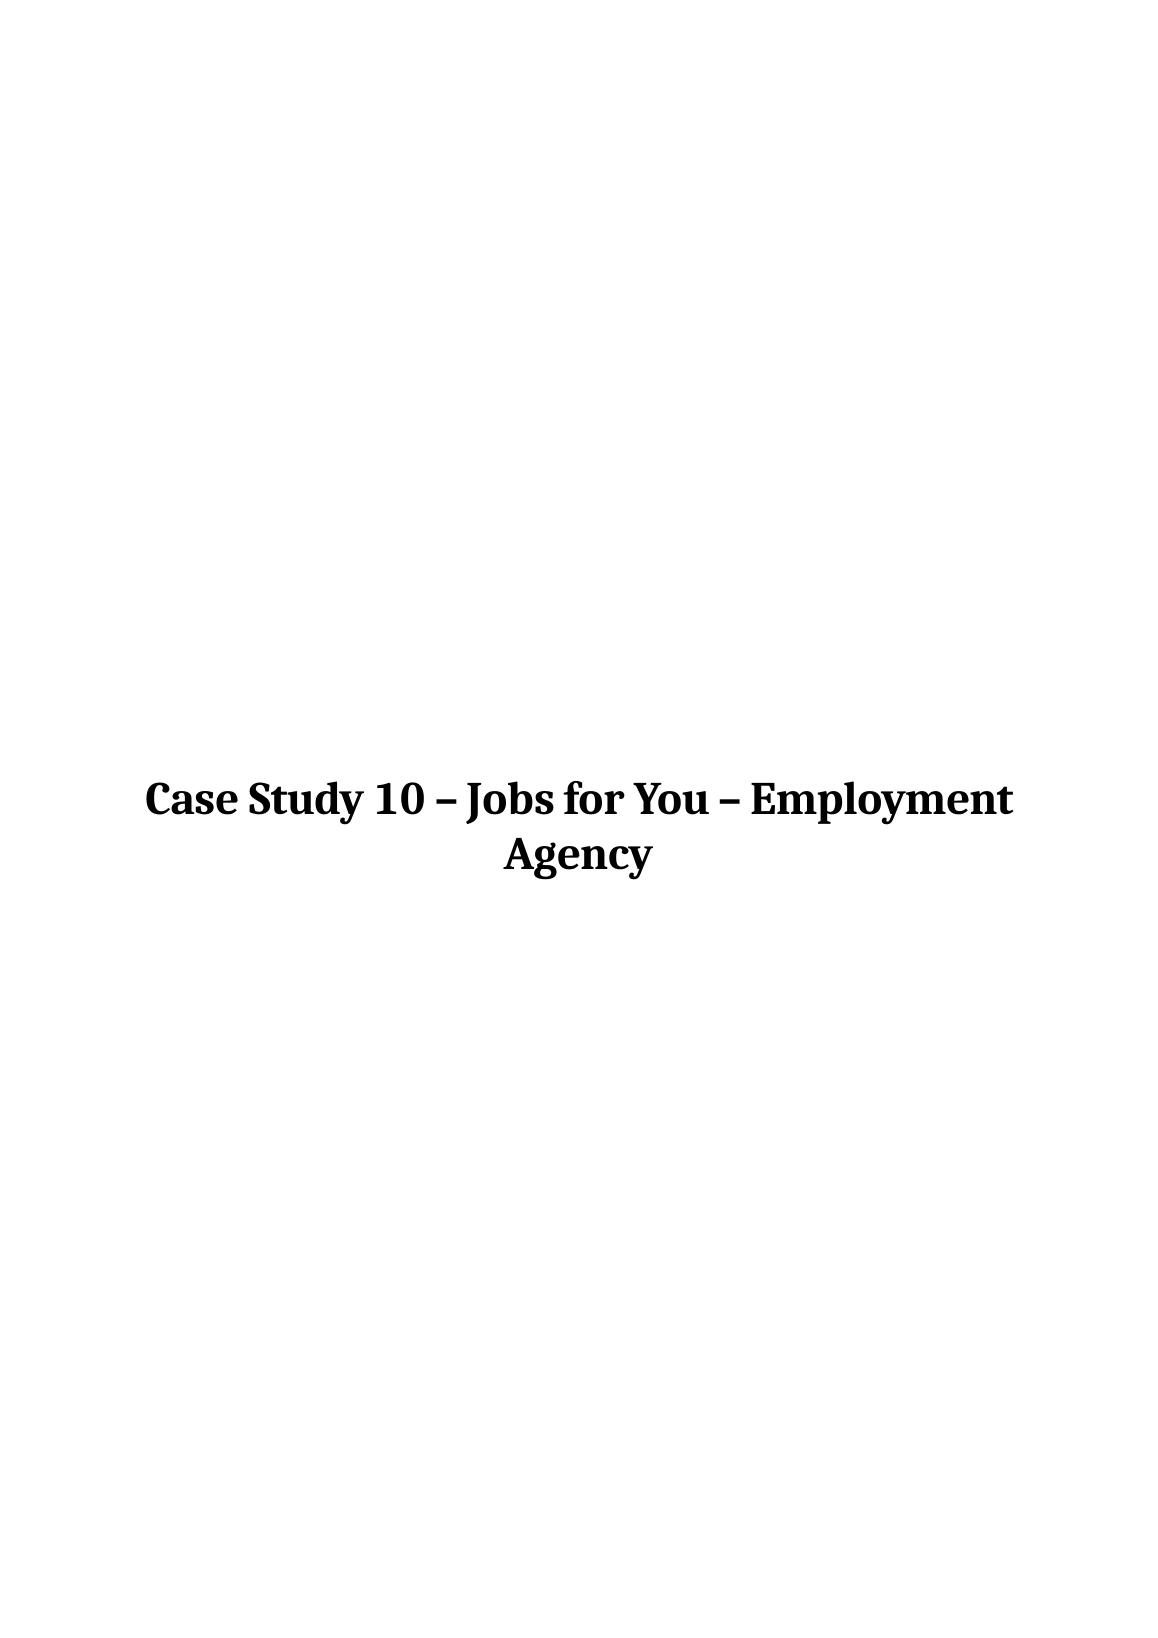 Case Study 10 Jobs for You Employment Agency_1